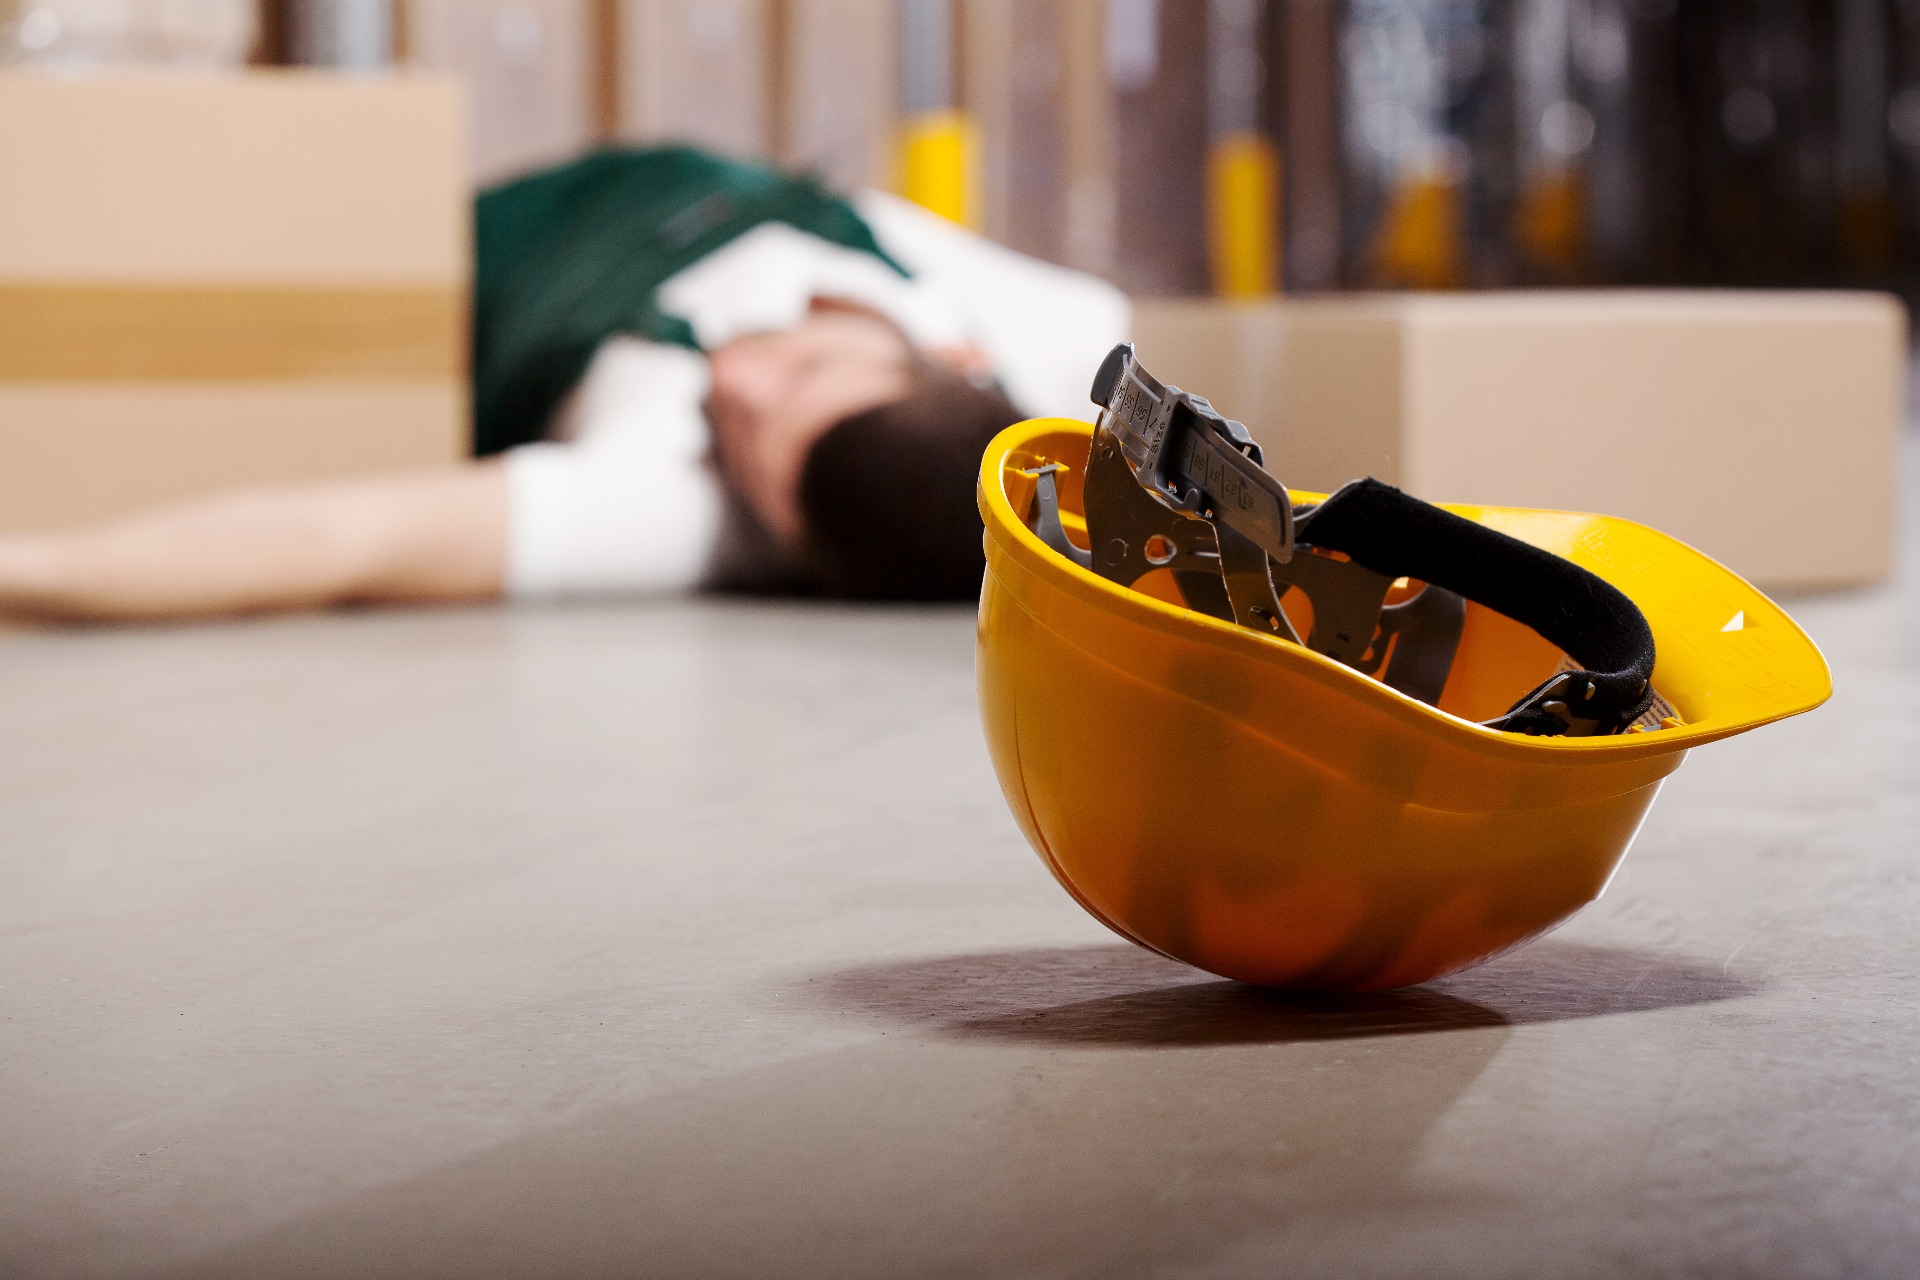 A man who has suffered from a fall at work, lying on the floor, with his hard hat just out of his reach.